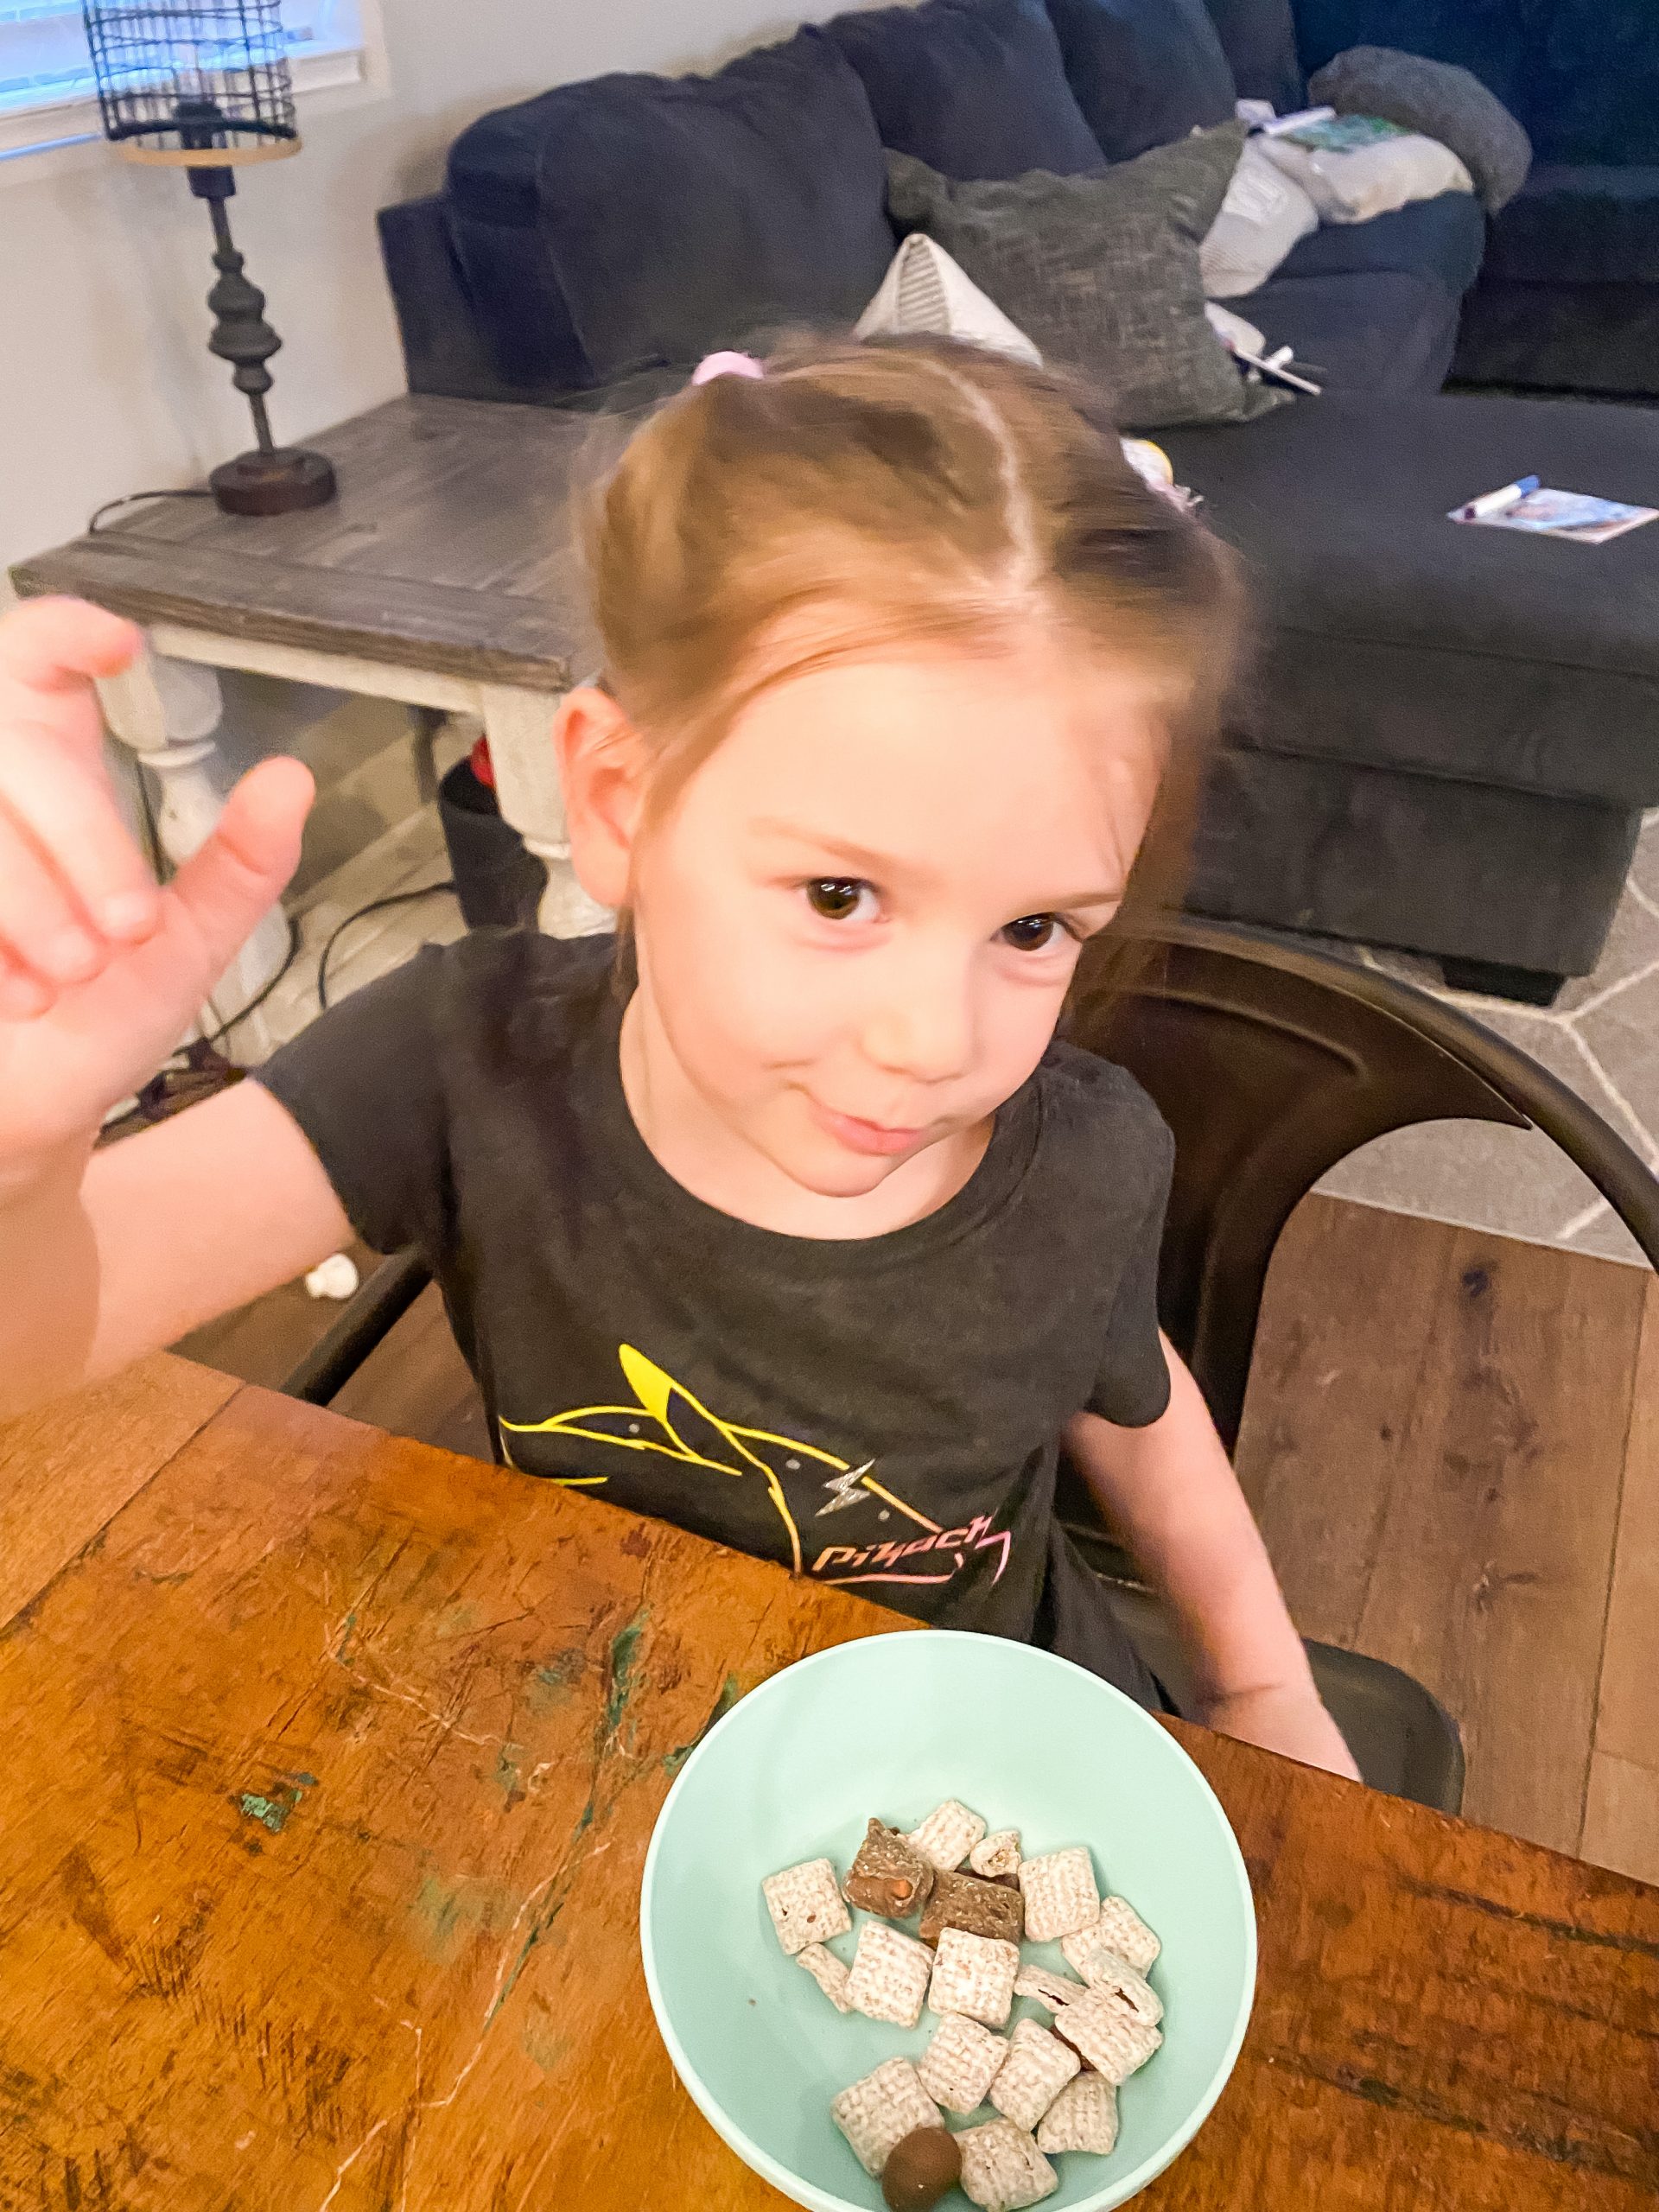 Four year old eating snack at table